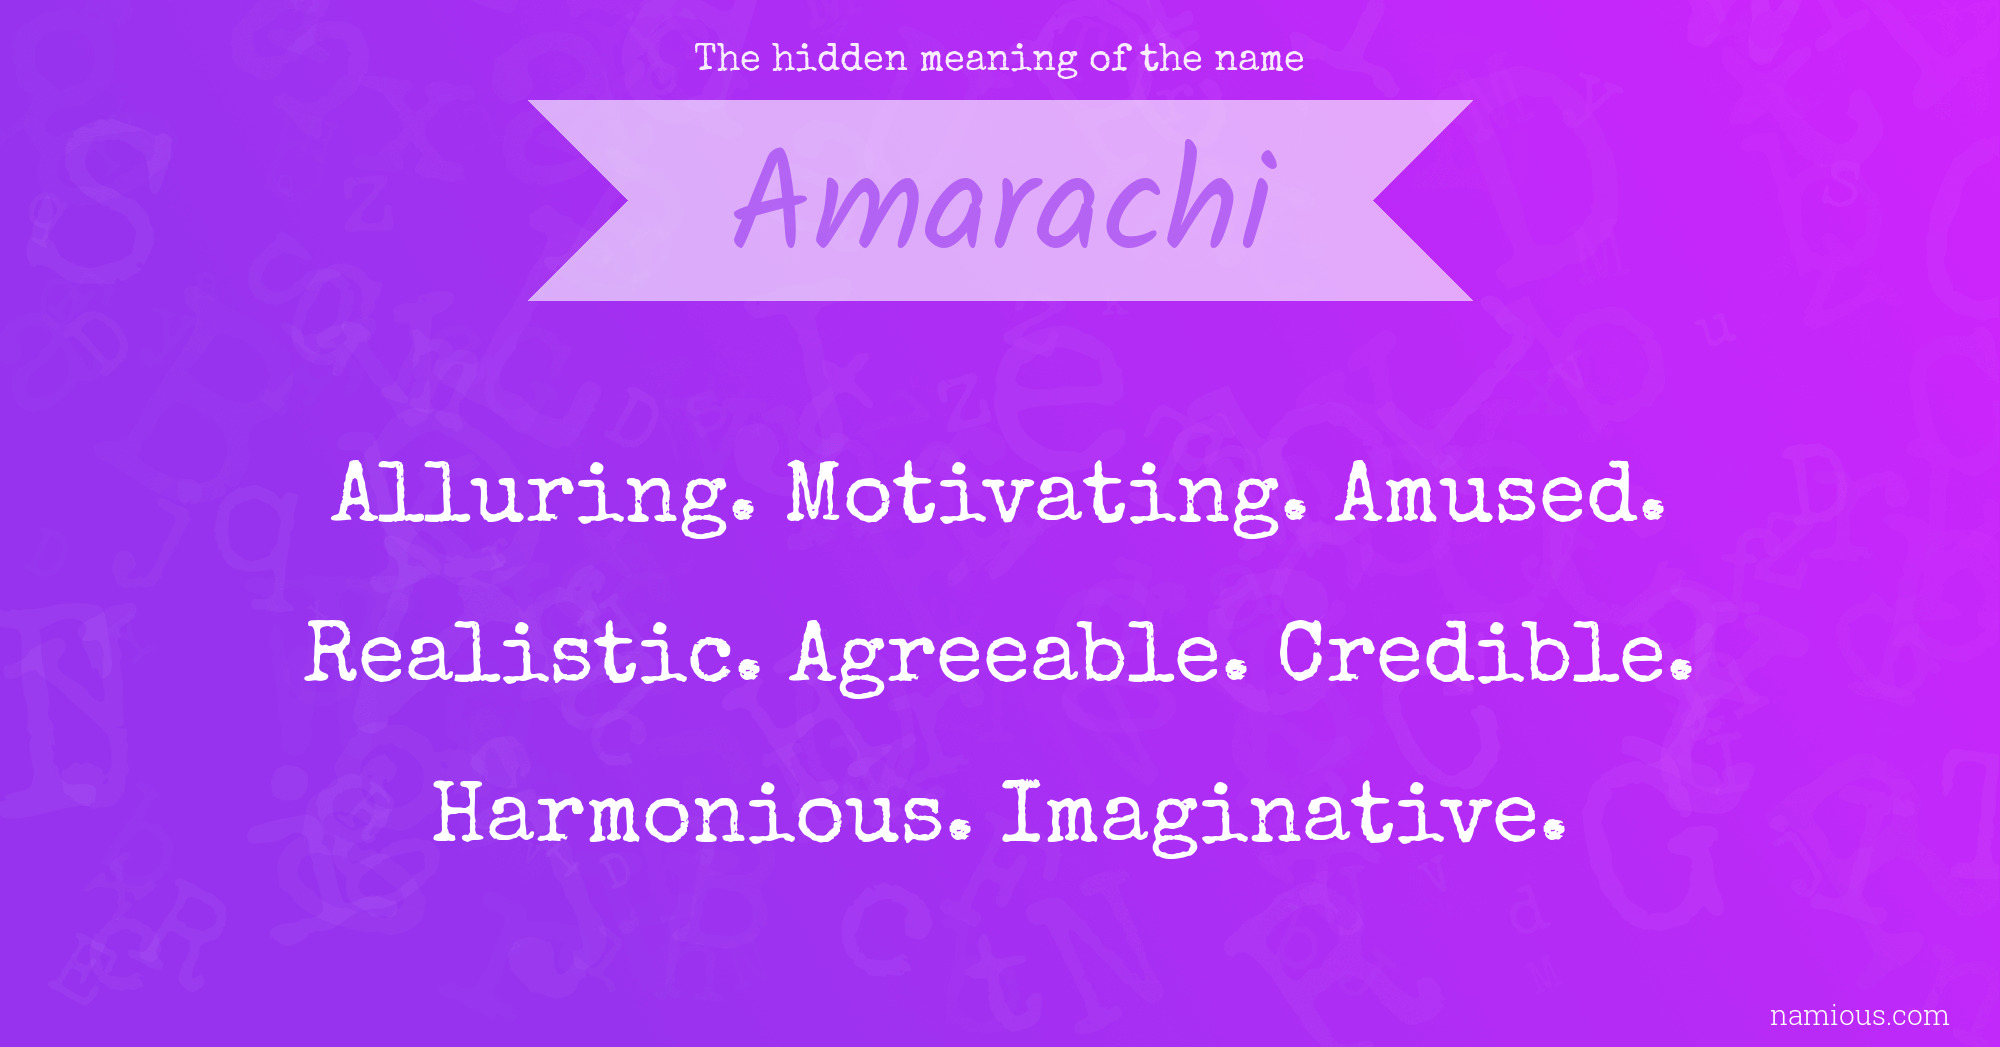 The hidden meaning of the name Amarachi